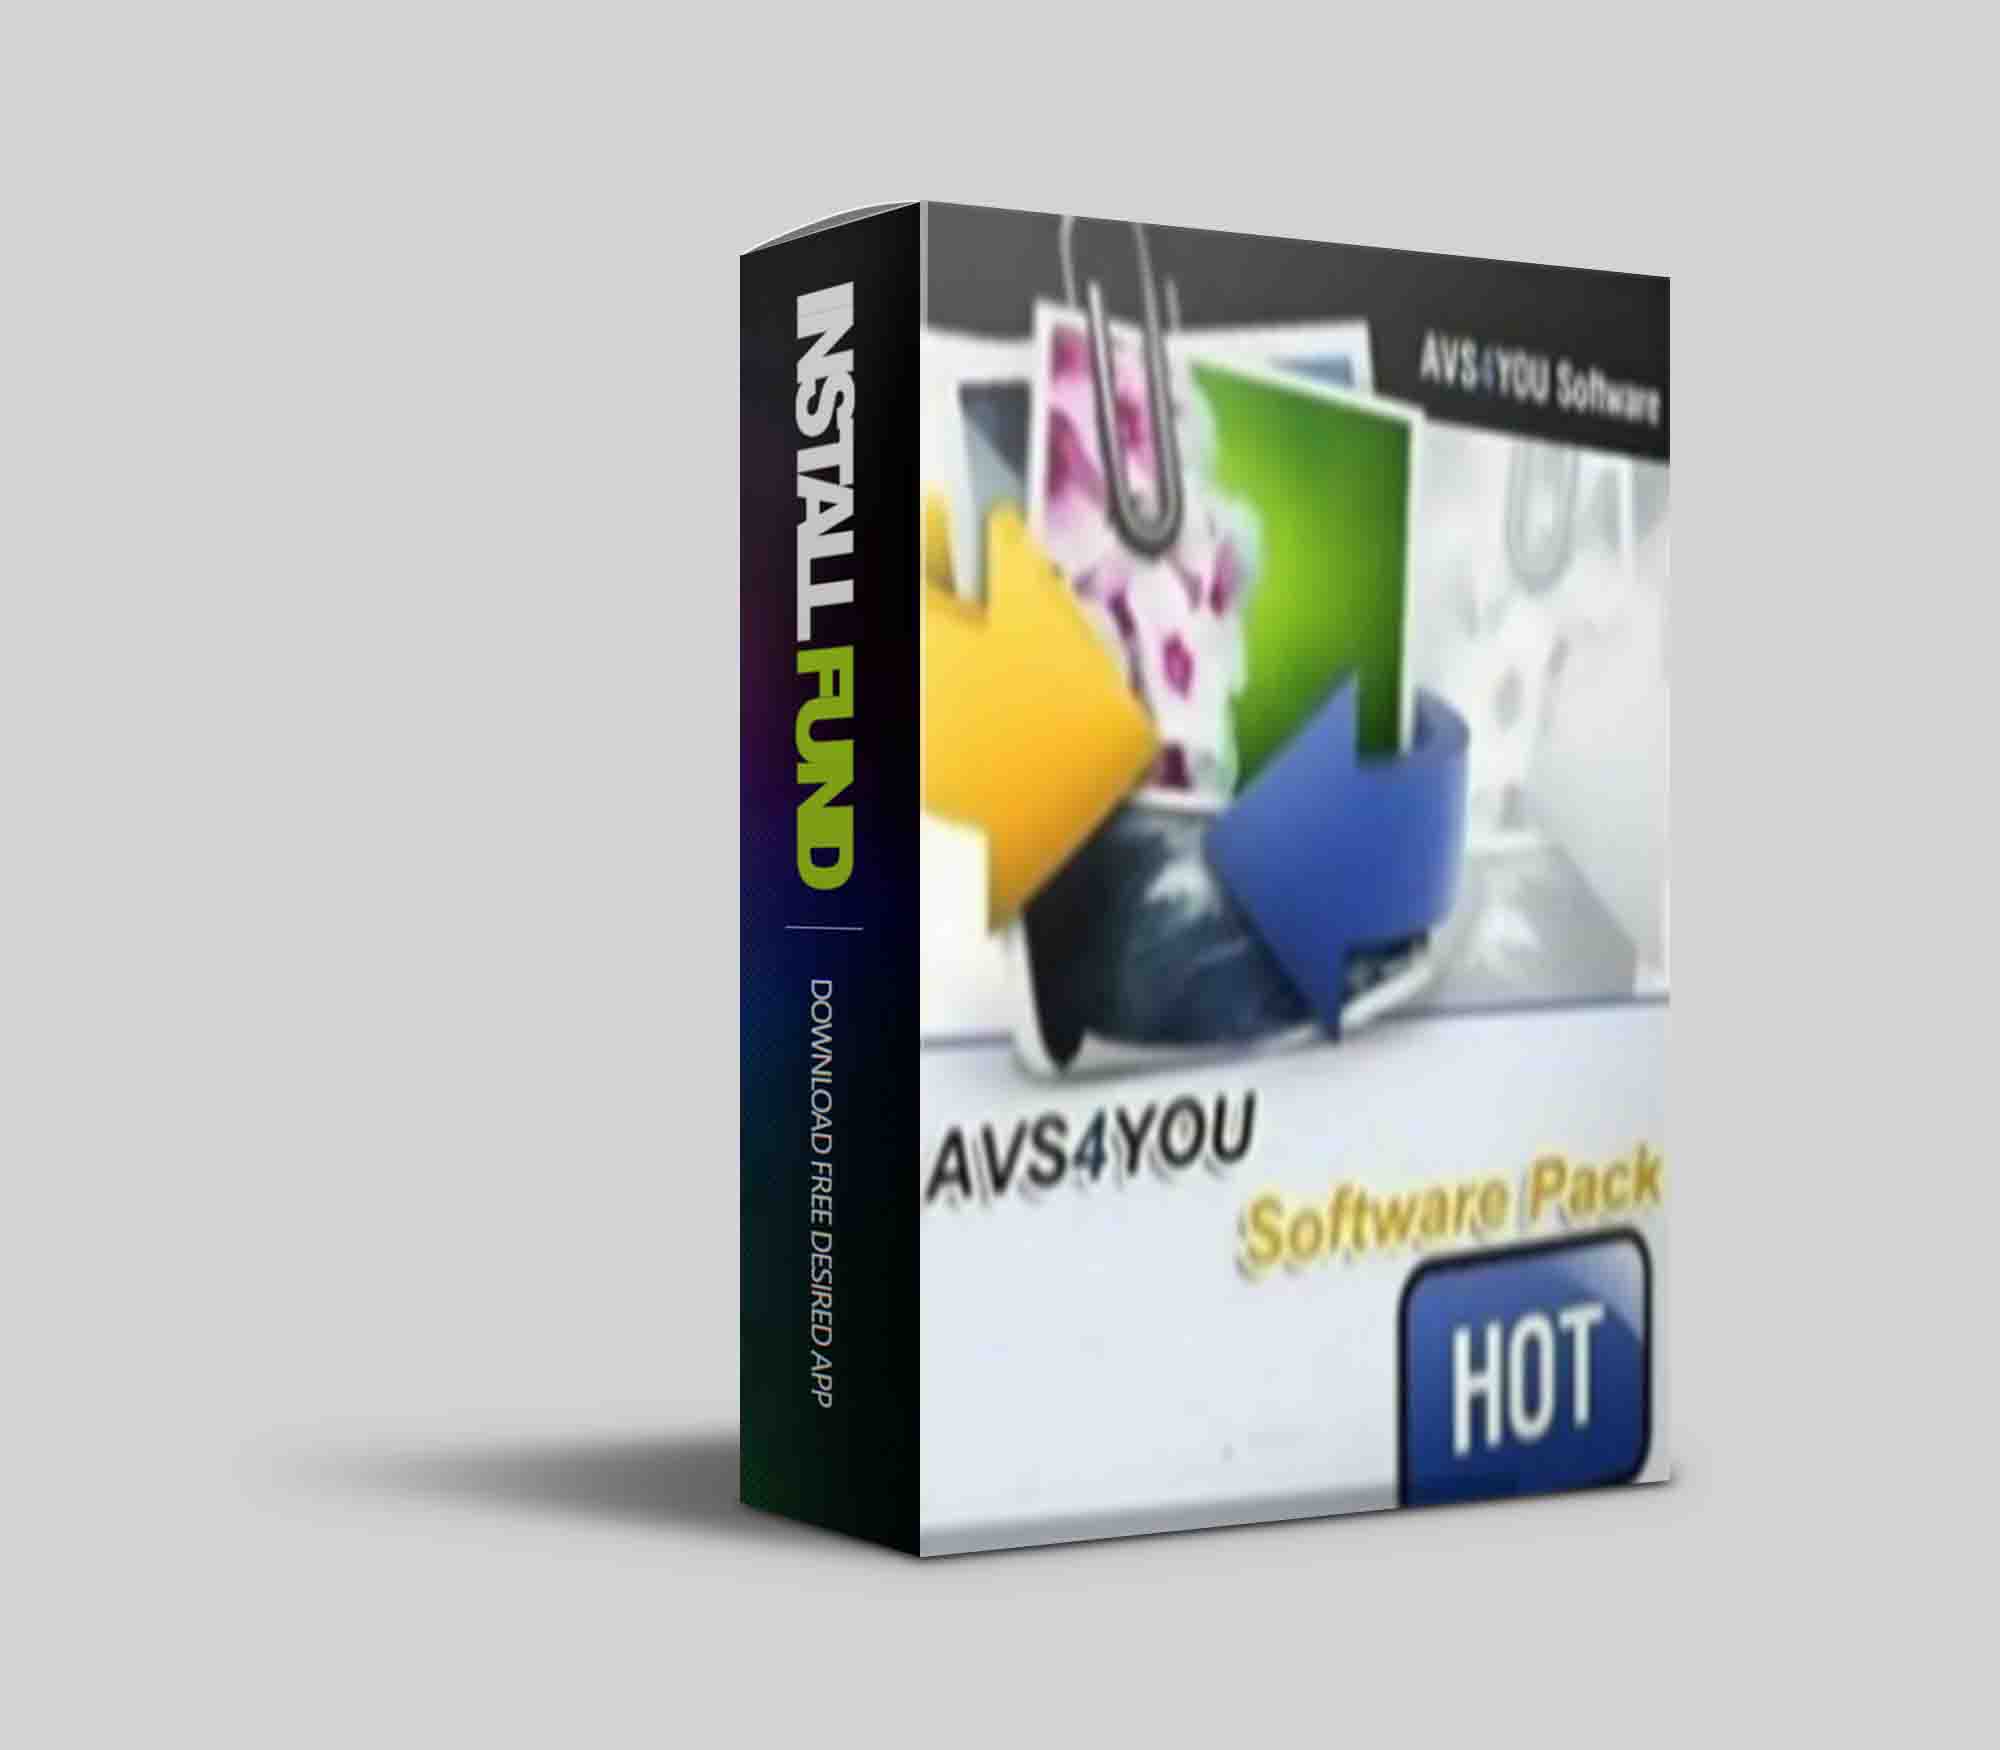 download avs4you software aio installation package 5.1.1.168